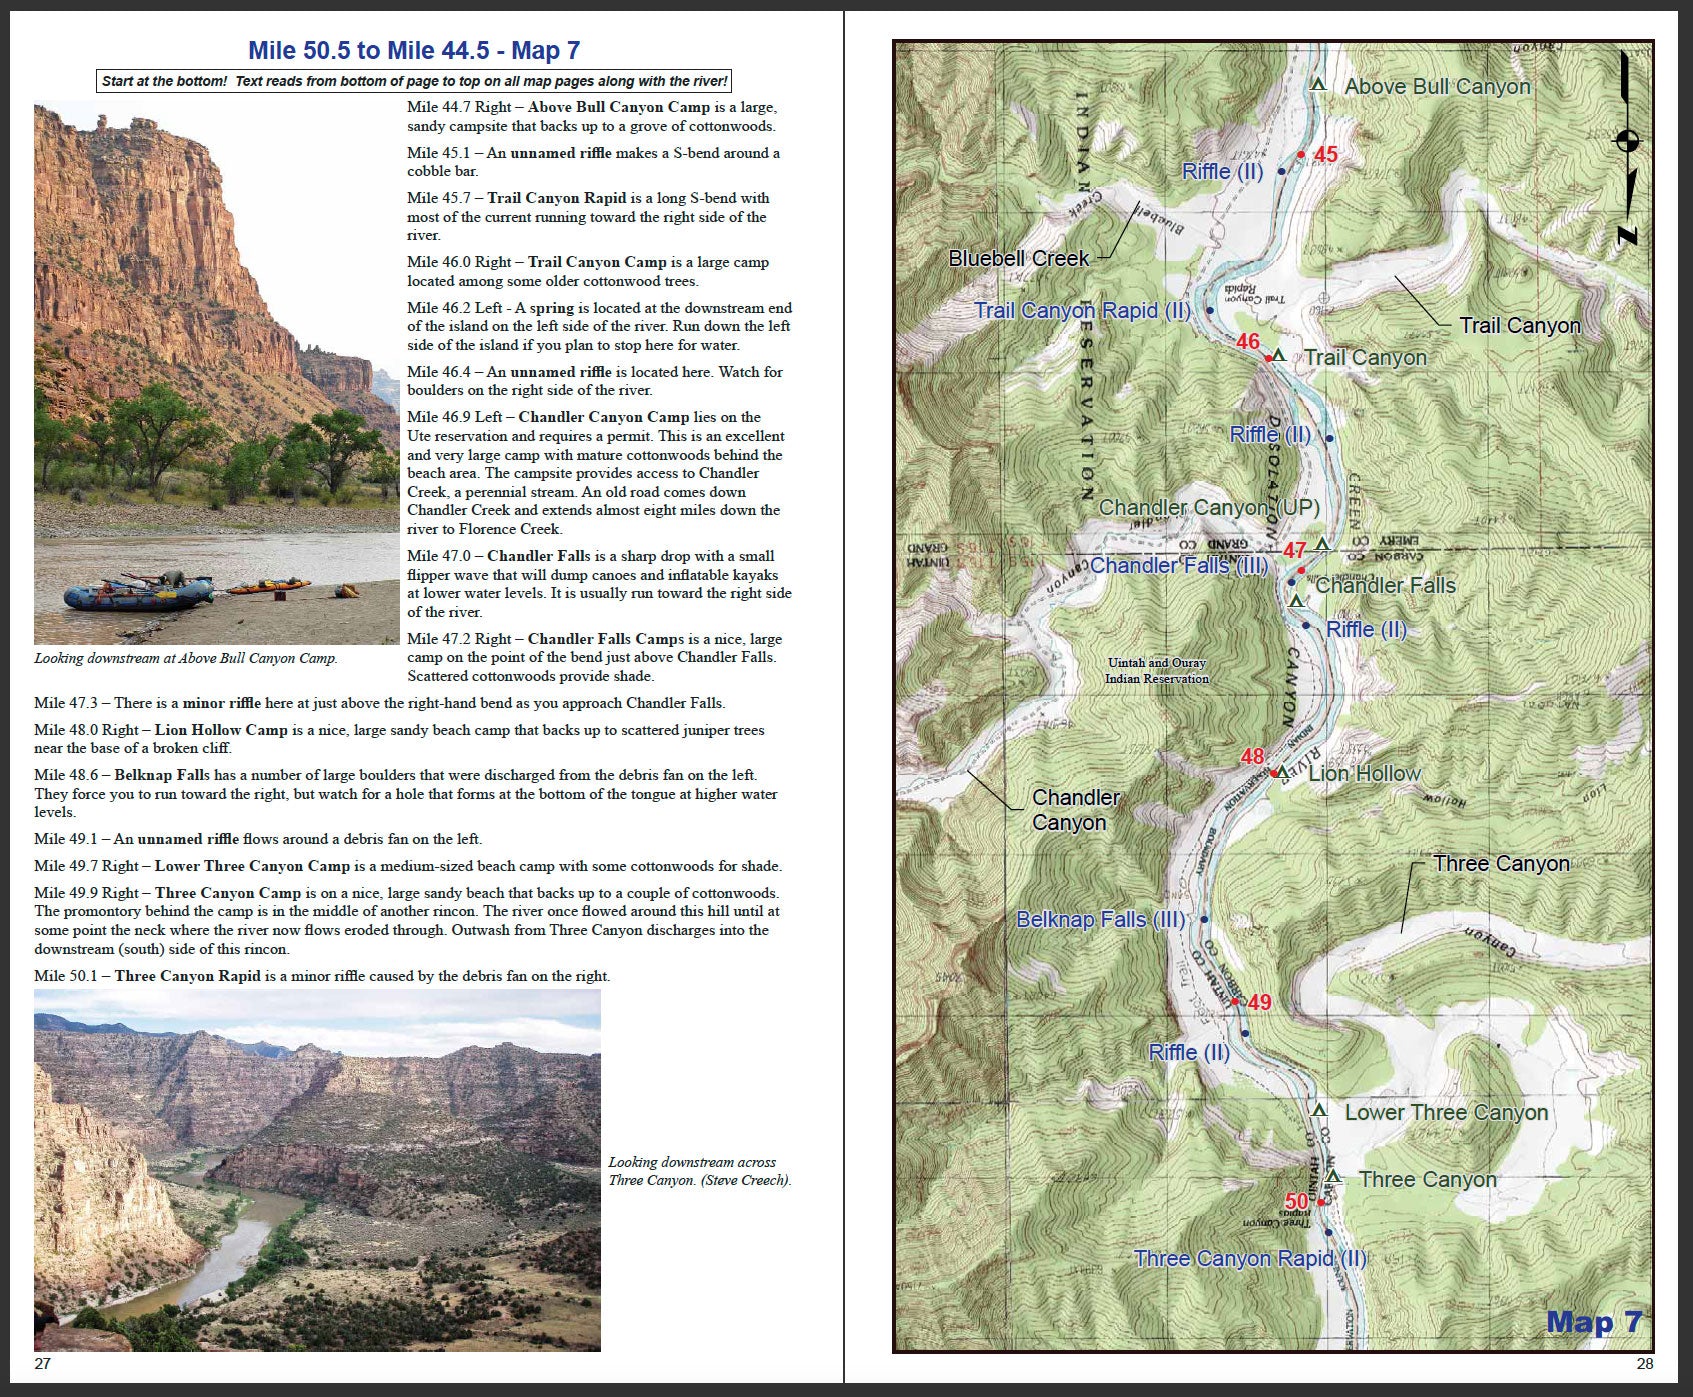 A Rivermaps guide to the Green River in Desolation and Gray Canyons and waterproof guide books for navigating it.